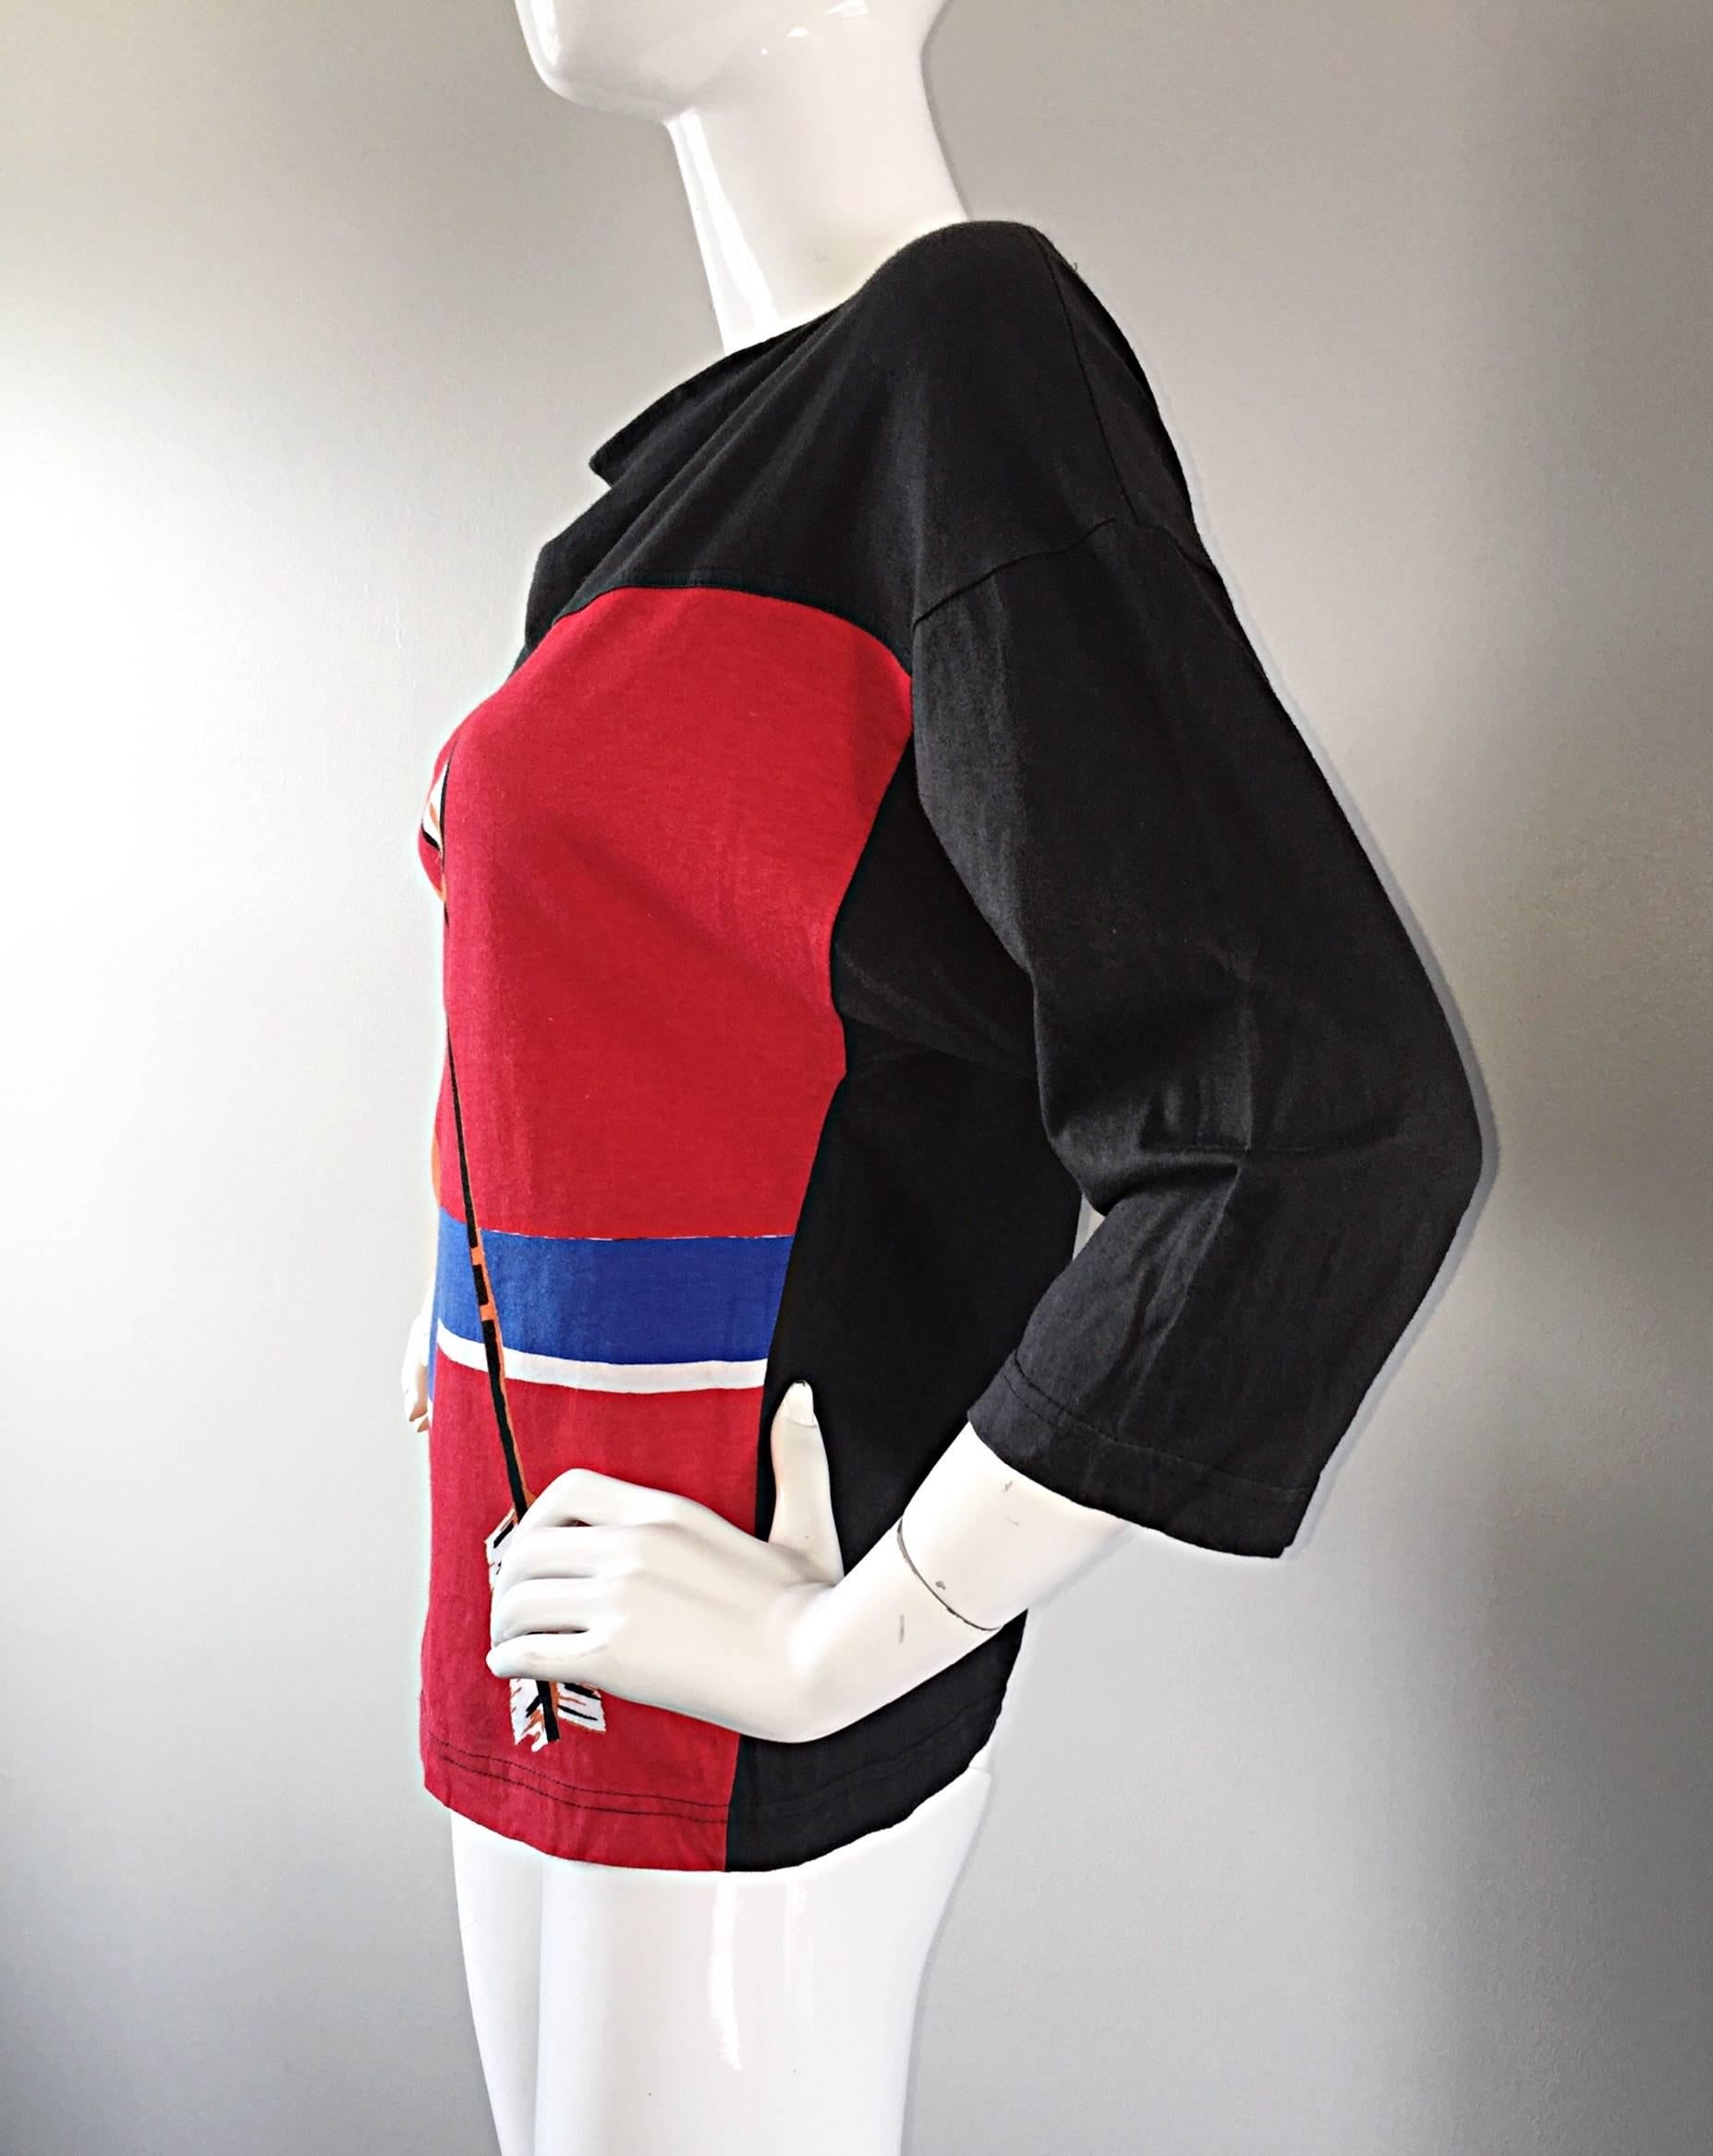 Vintage Michaele Vollbracht ' Bow & Arrow ' Op - Art Rare Color Block Top Blouse In Excellent Condition For Sale In San Diego, CA